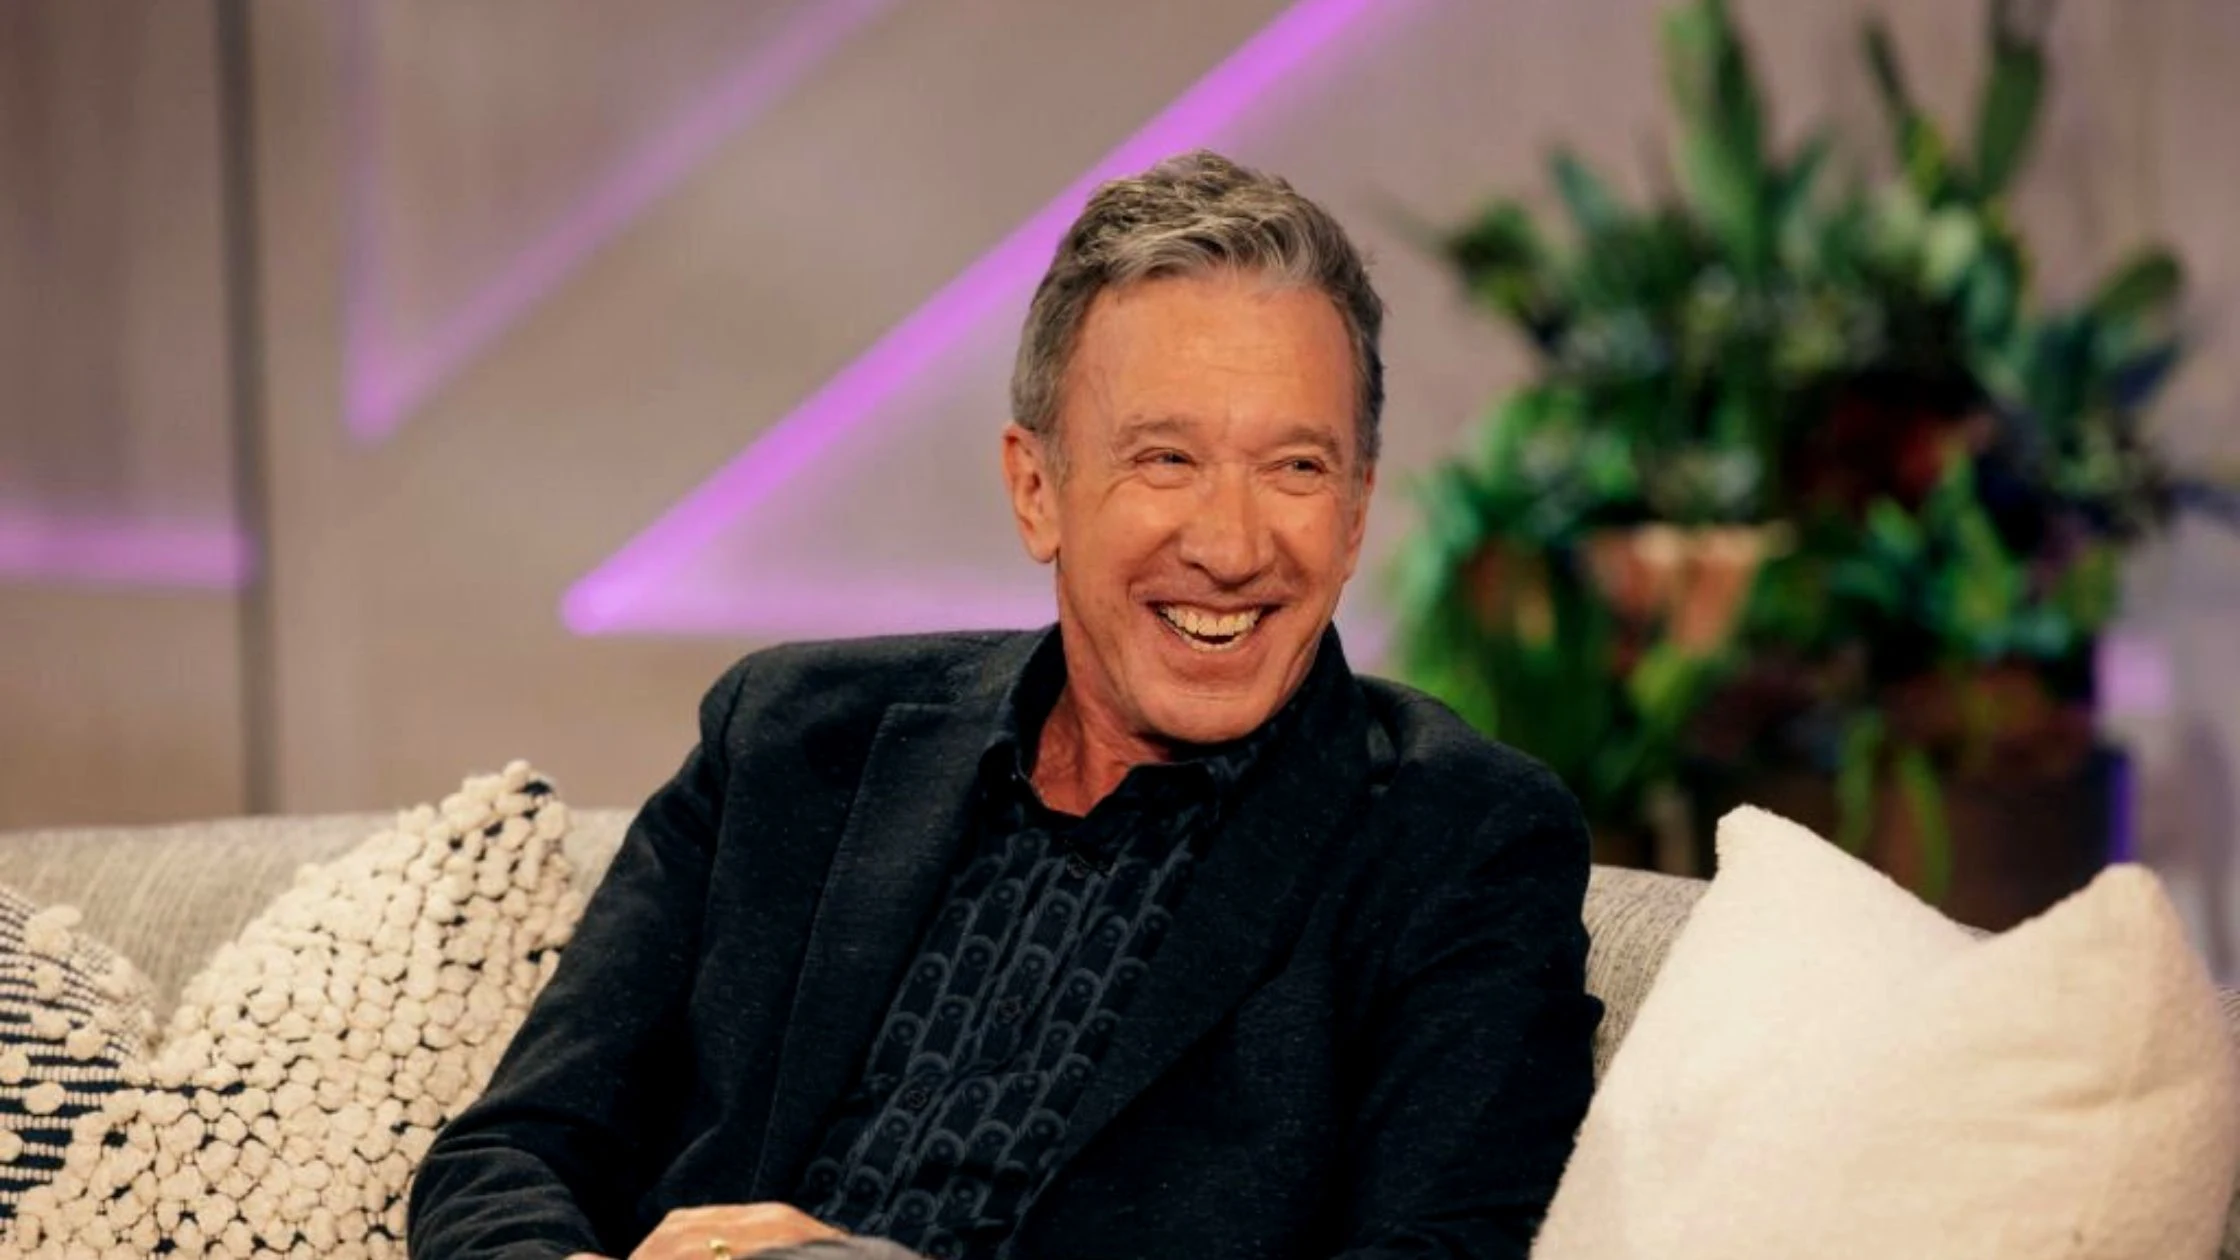 All About Tim Allen Net worth, Movies, TV Shows, Personal Life